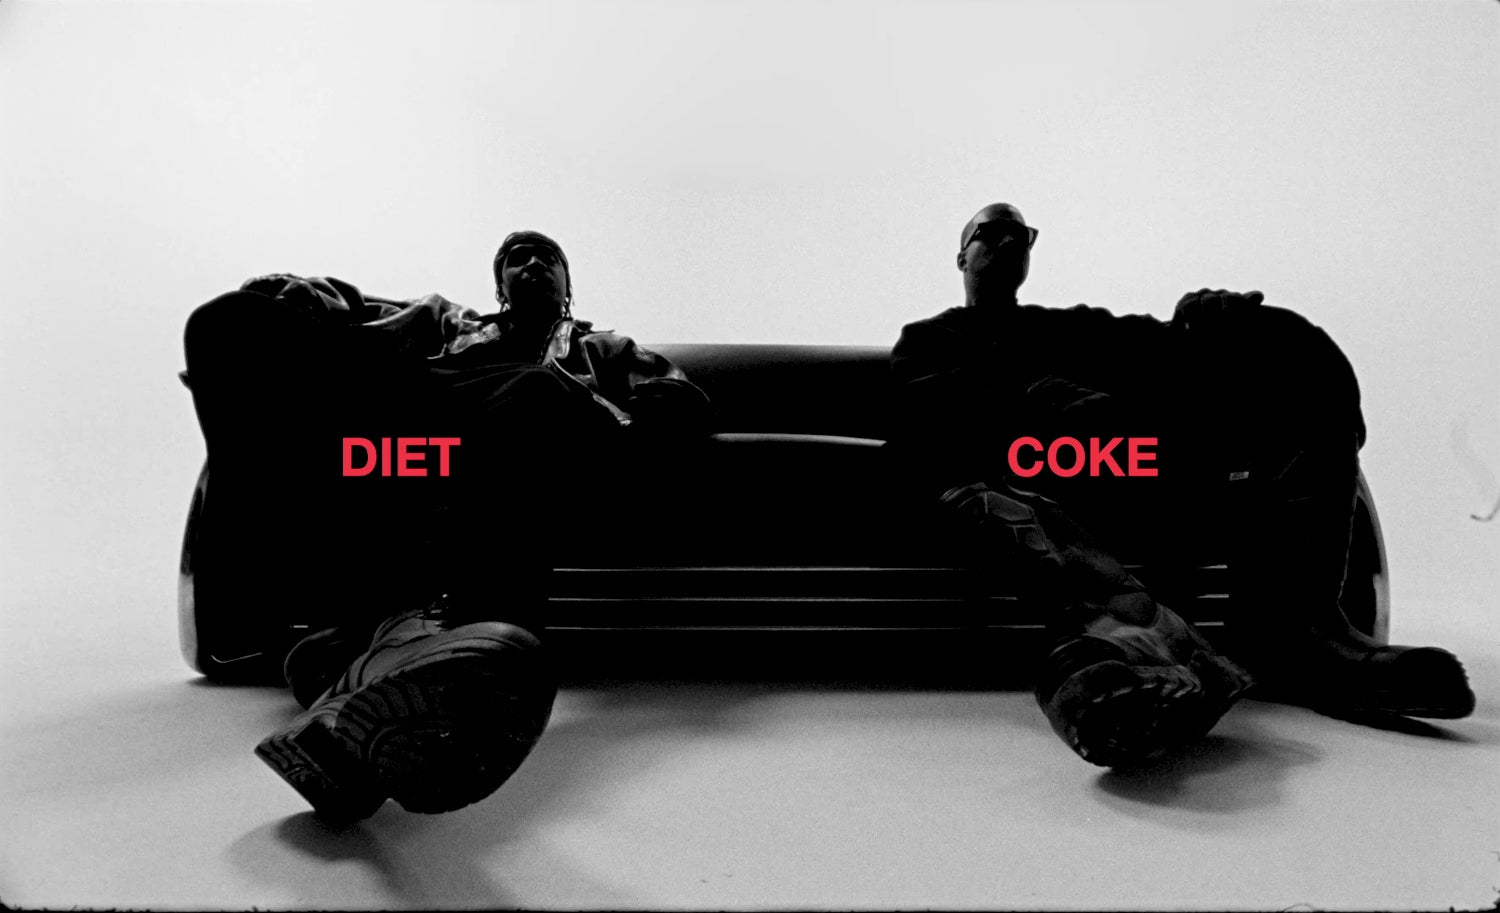 Pusha T and Ye Share a Dance in the Video for “Diet Coke”